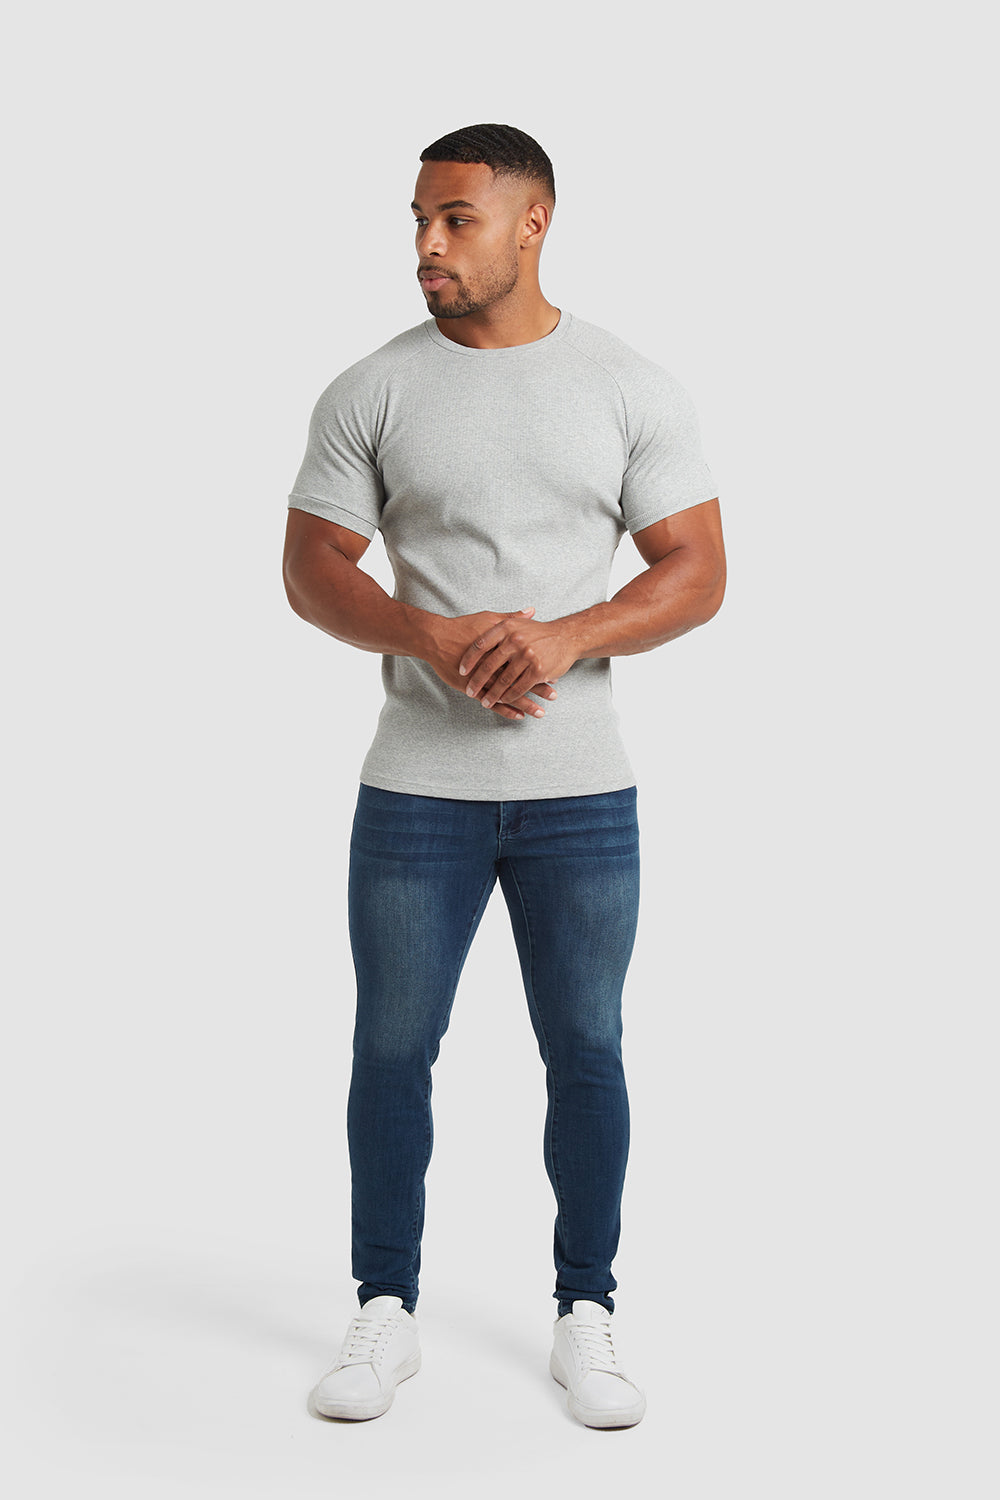 Ribbed Polo in Truffle - TAILORED ATHLETE - ROW